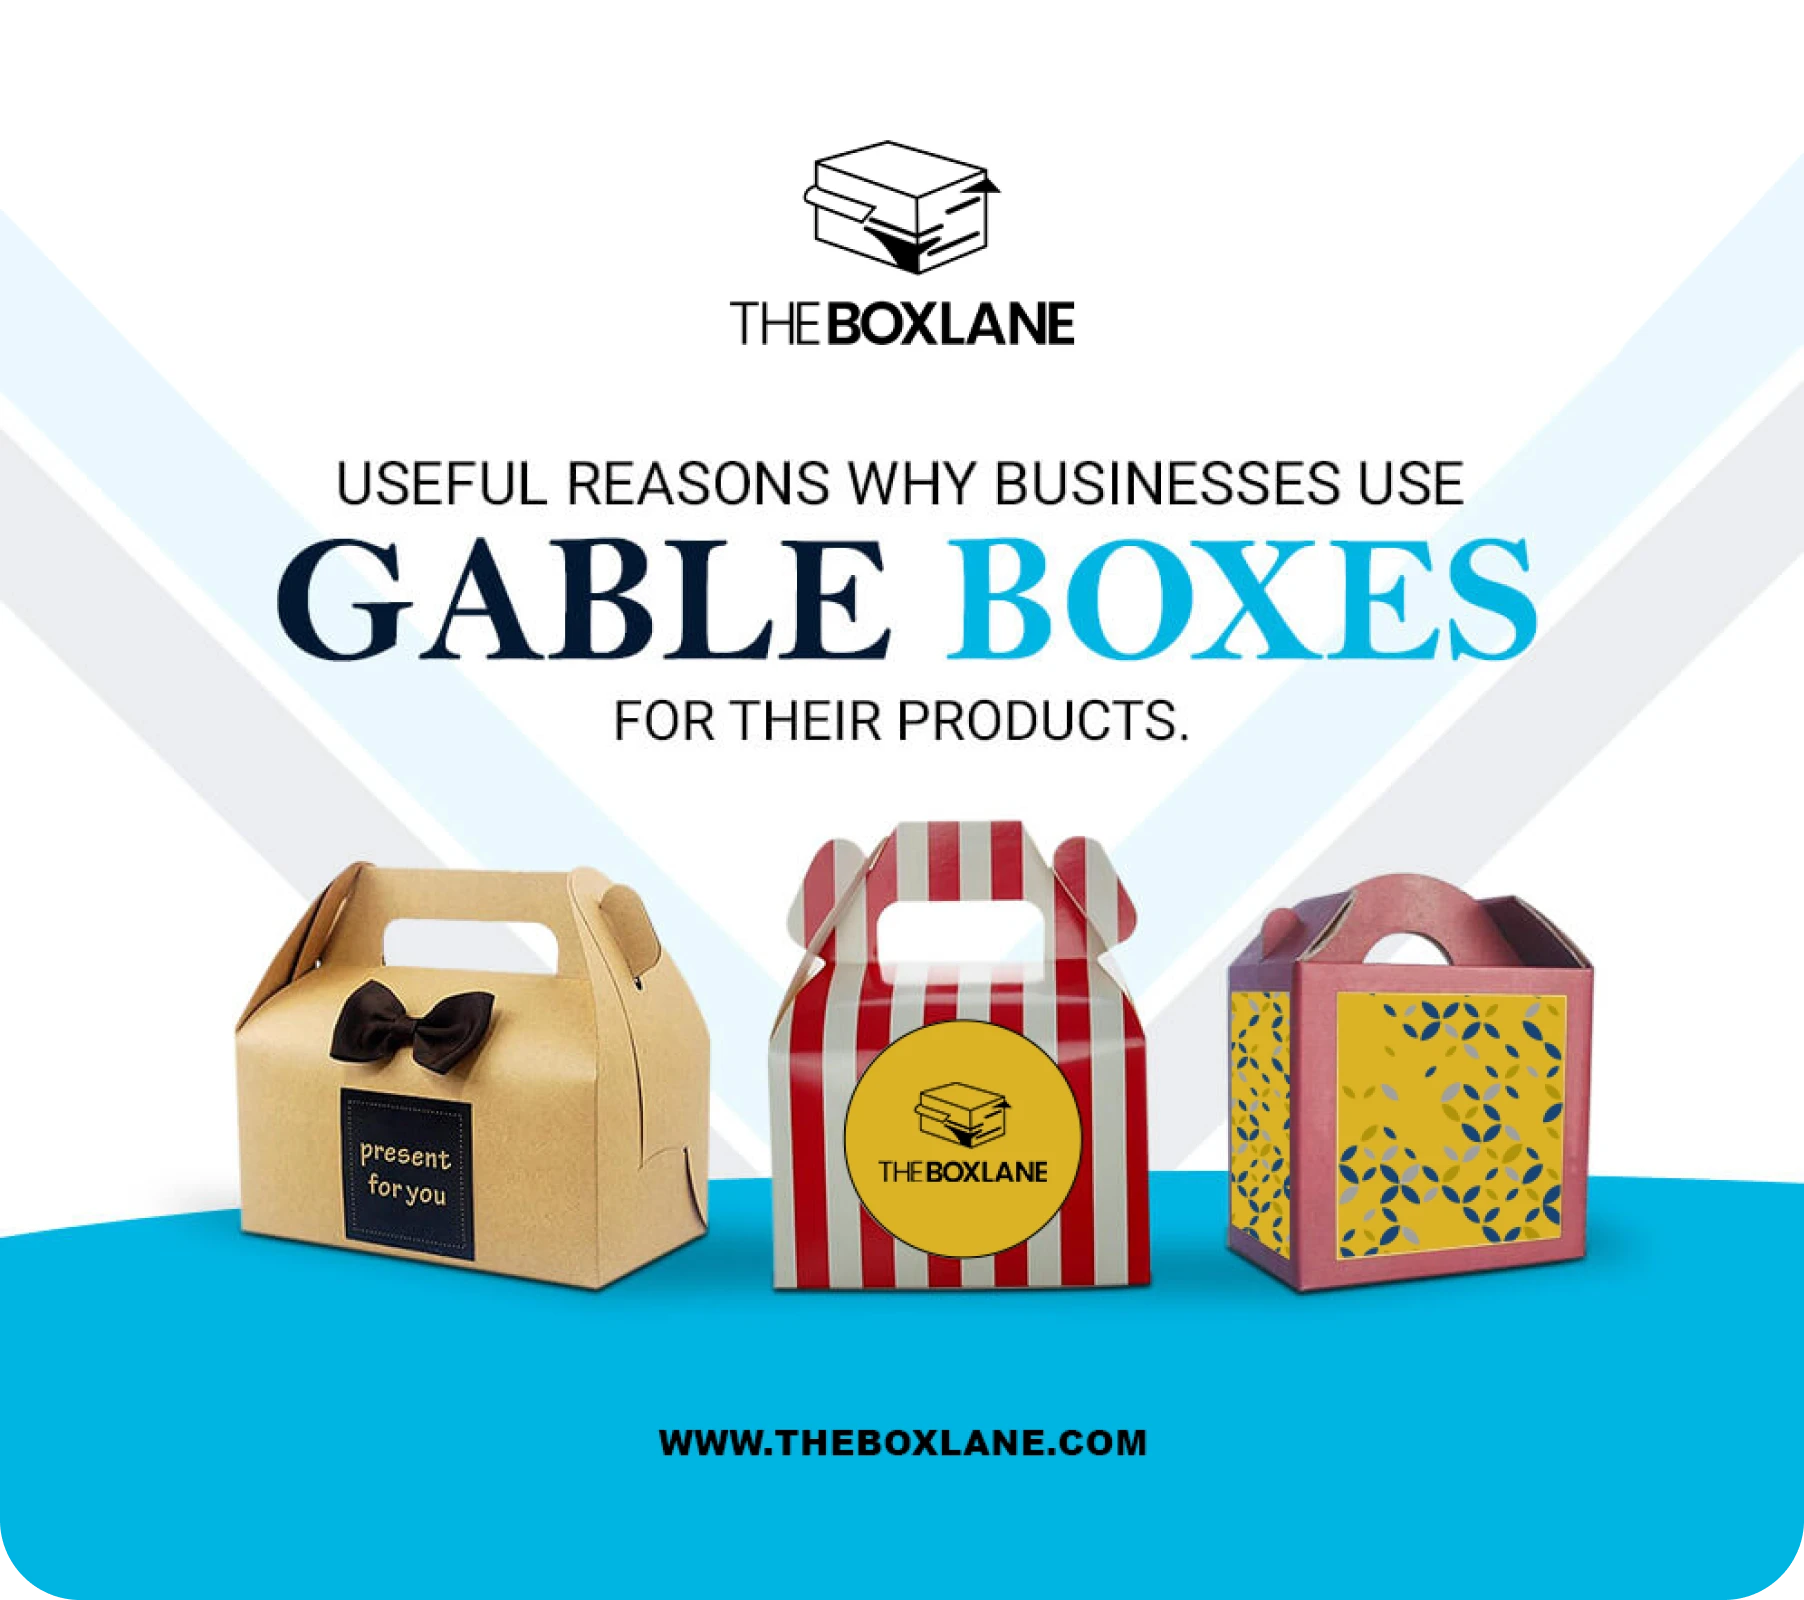 Choose The Box Lane for Large Gable Boxes Packaging | The Box Lane